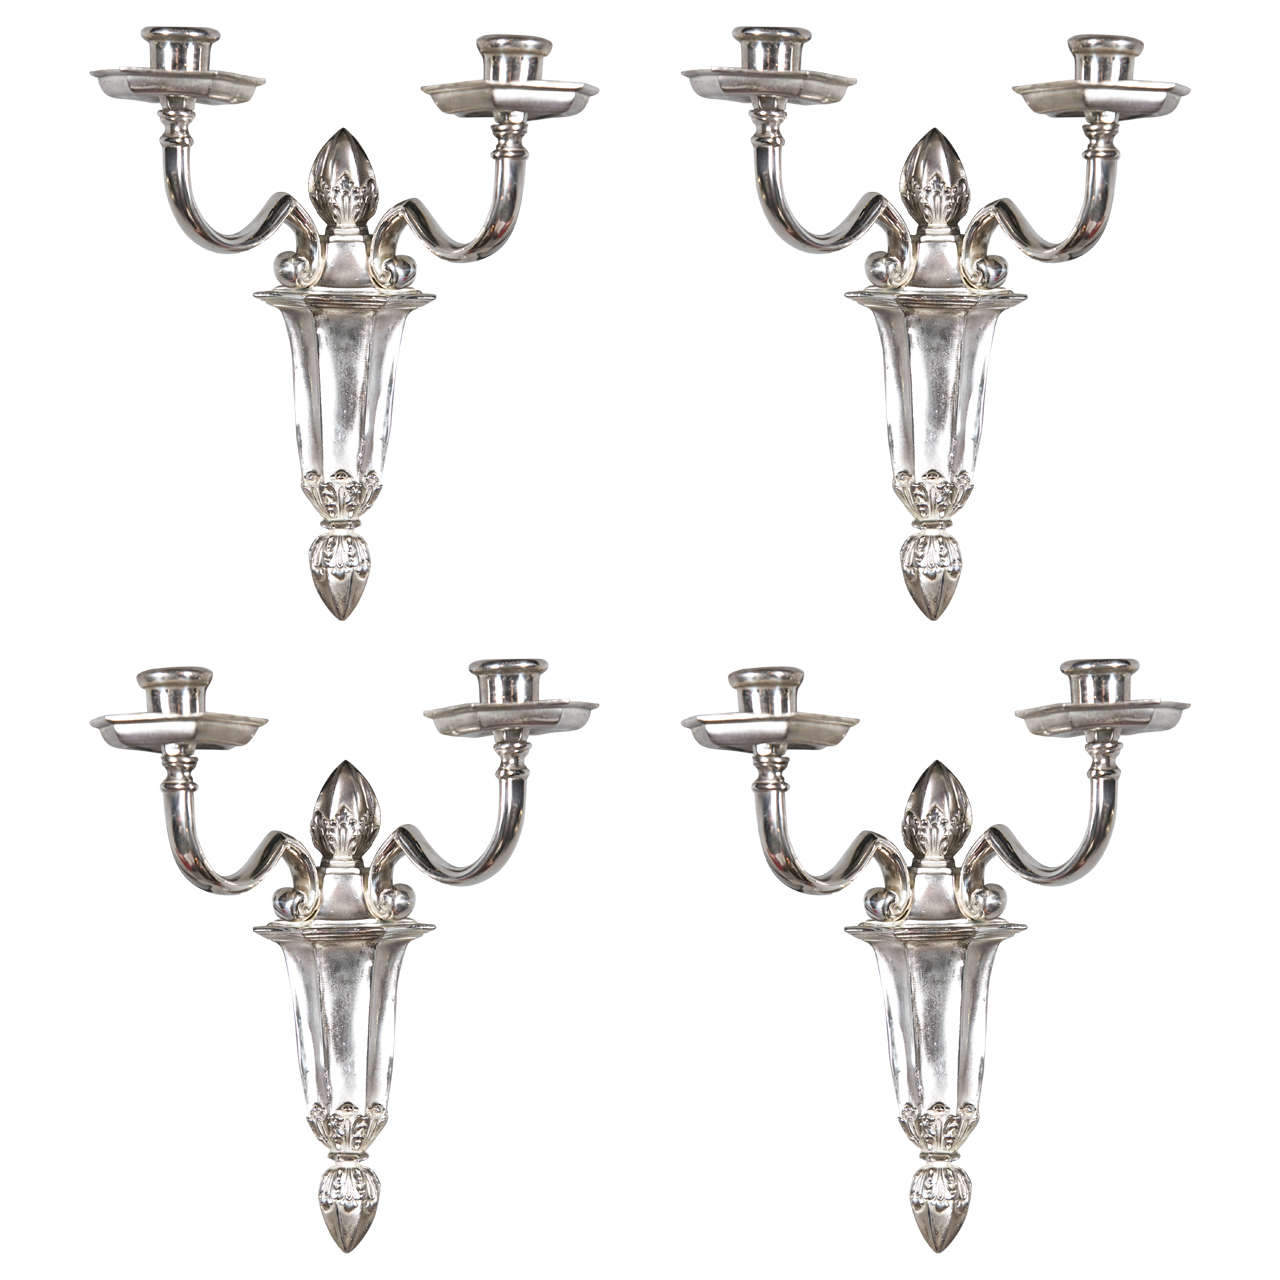 8 pair of Caldwell sconces For Sale